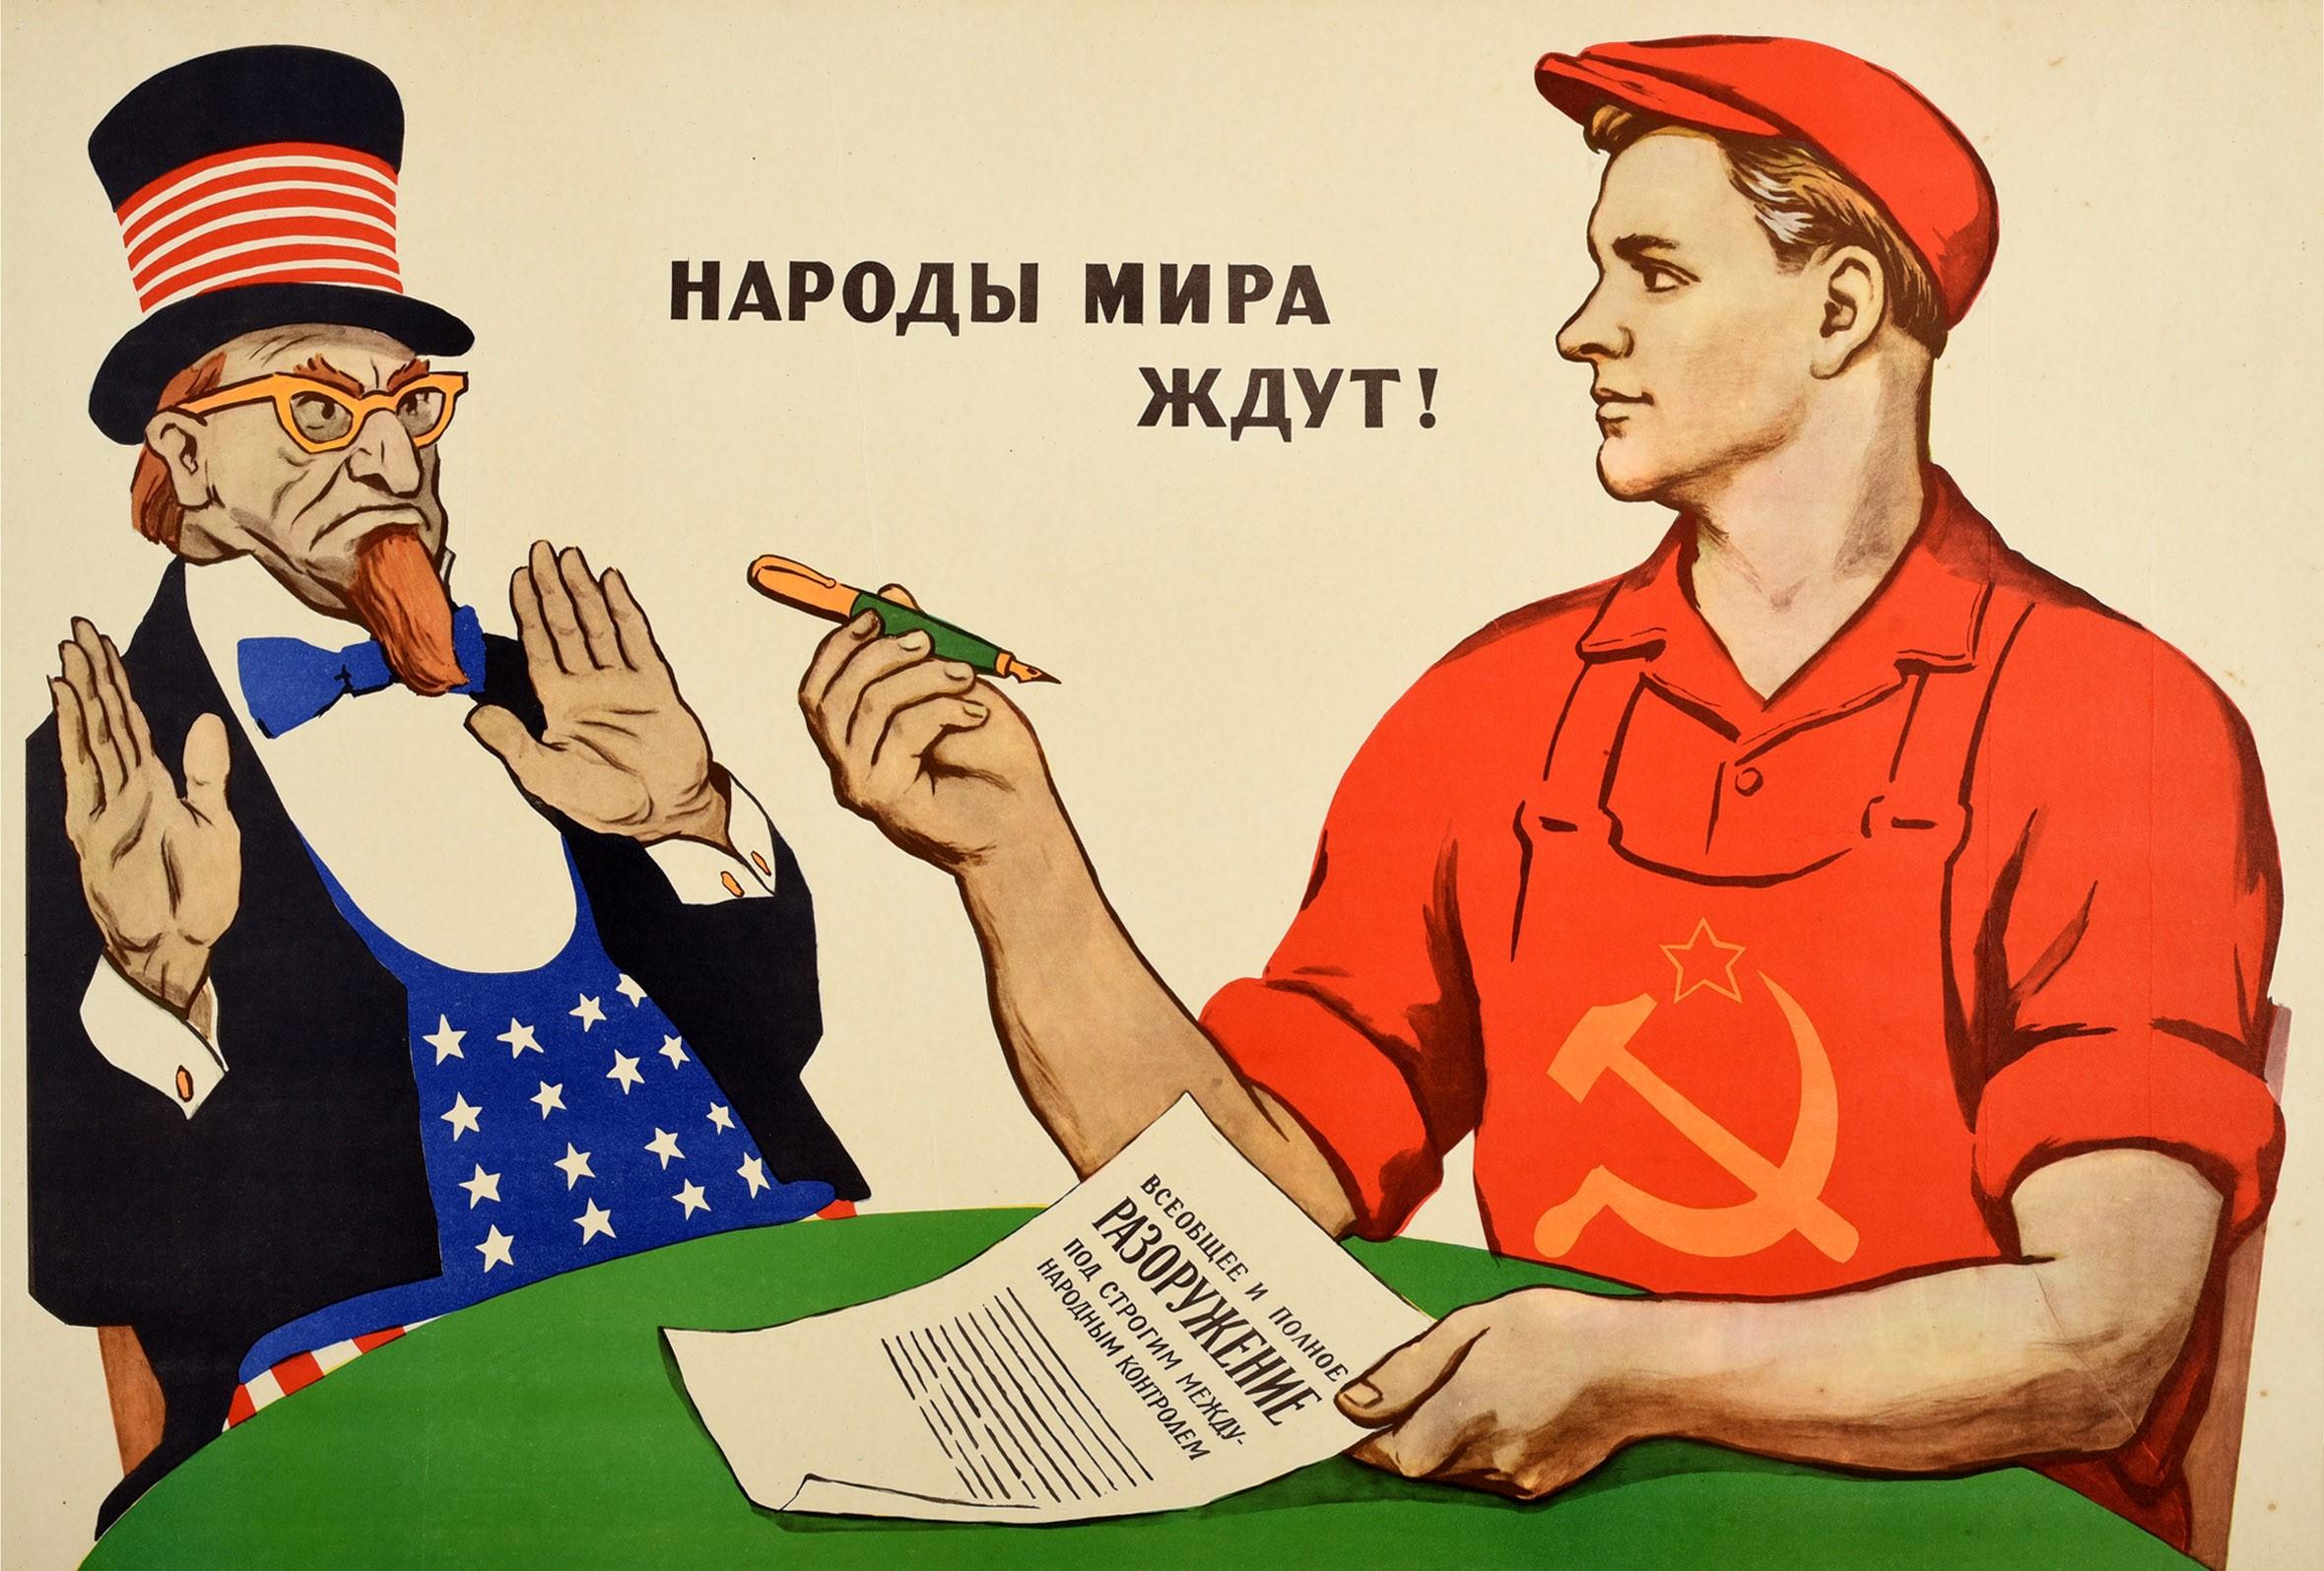 Original vintage Soviet Cold War period propaganda poster - The People of the World Are Waiting! ?????? ???? ????! - featuring a young worker with the Soviet hammer and sickle emblem on his red overalls holding up a pen to give it to a caricature of